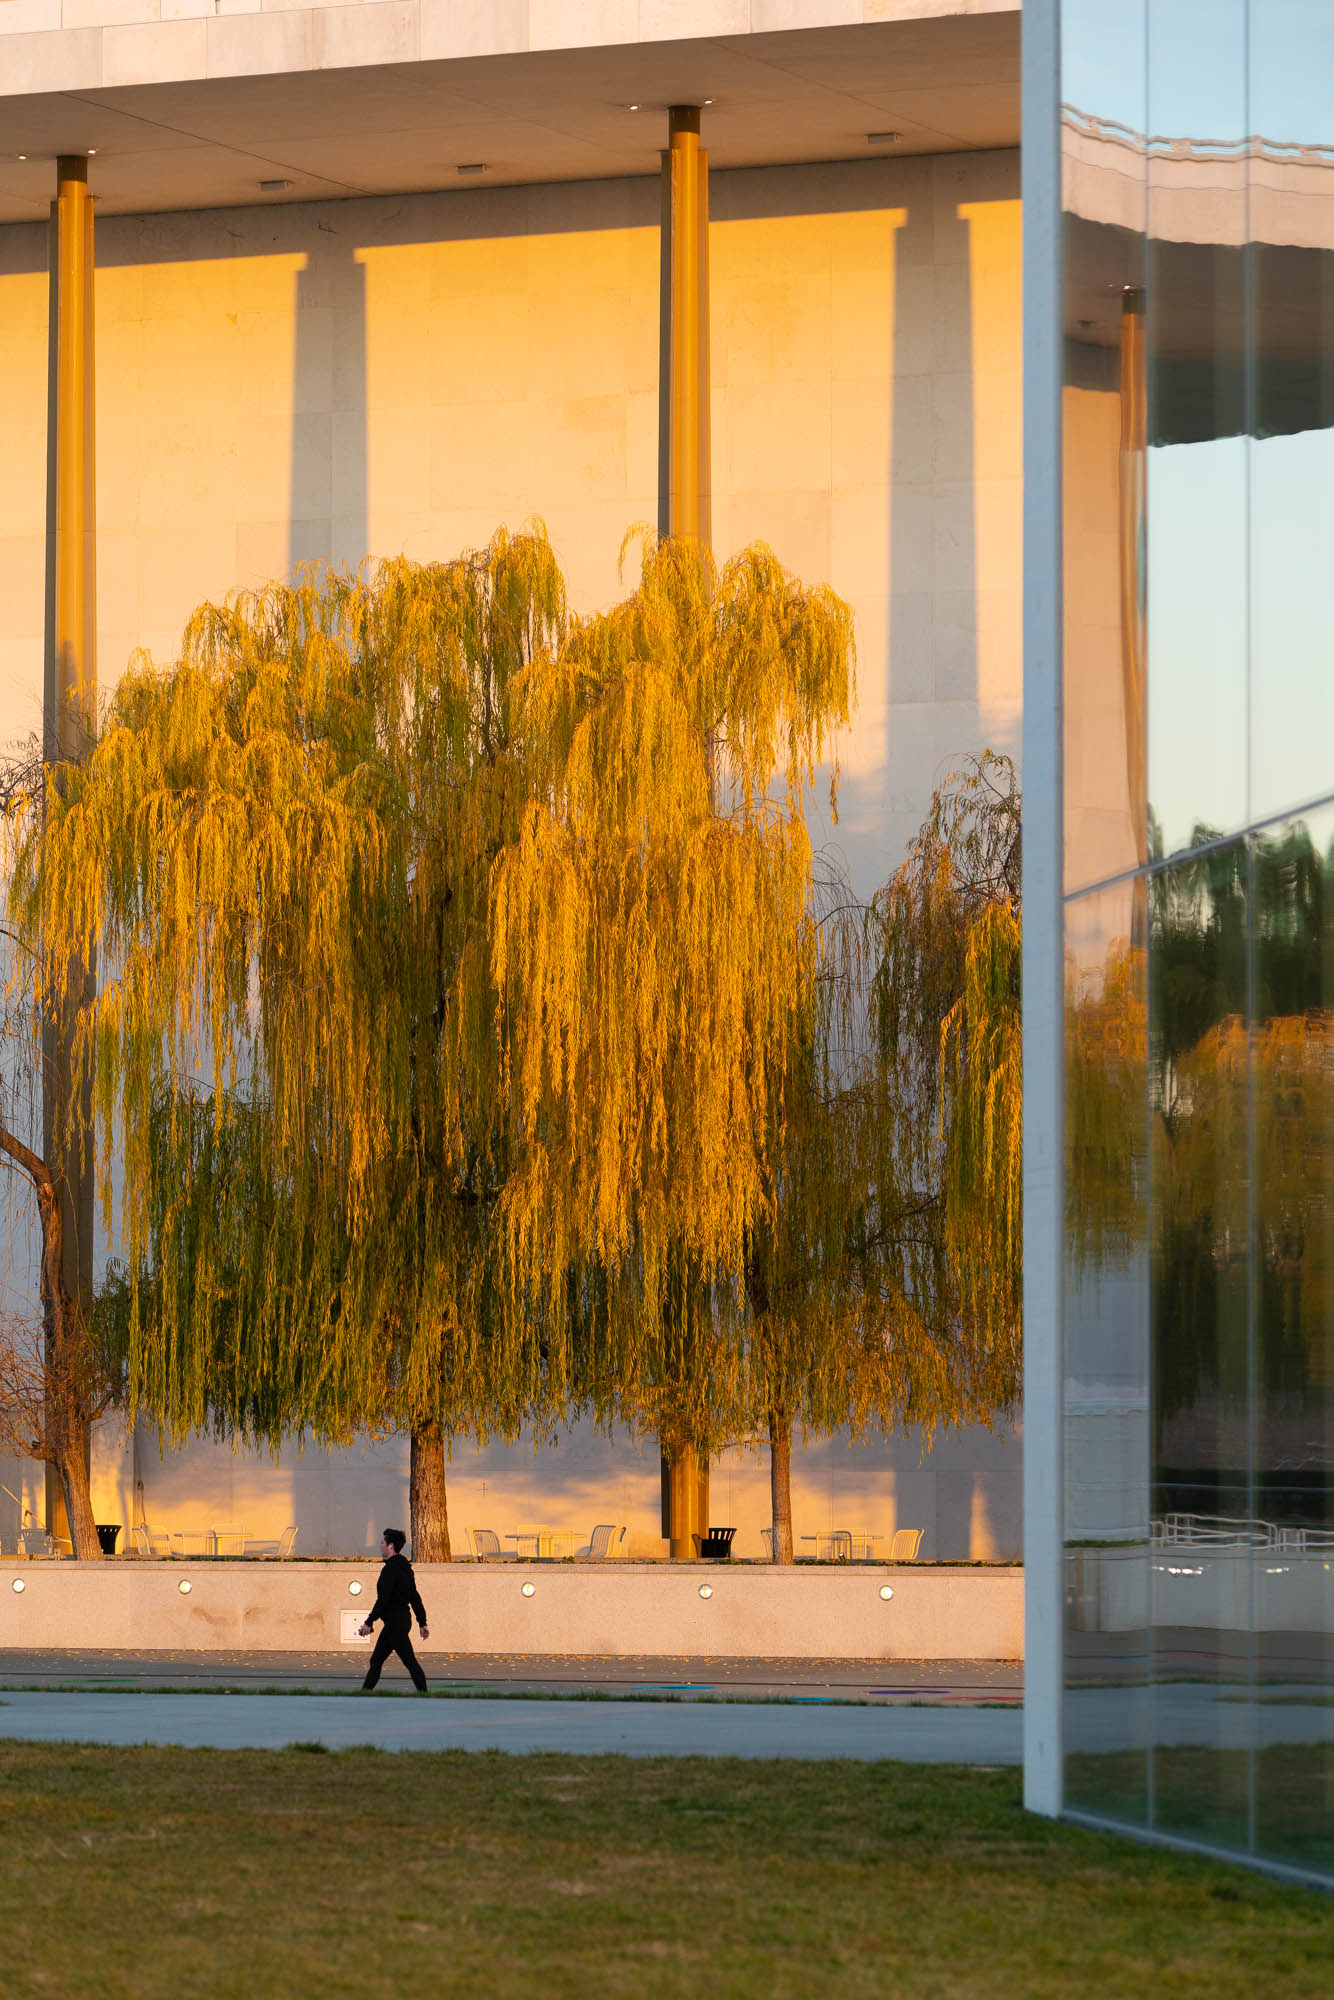 kennedy center, washington dc, dogs in dc, willow trees, architecture